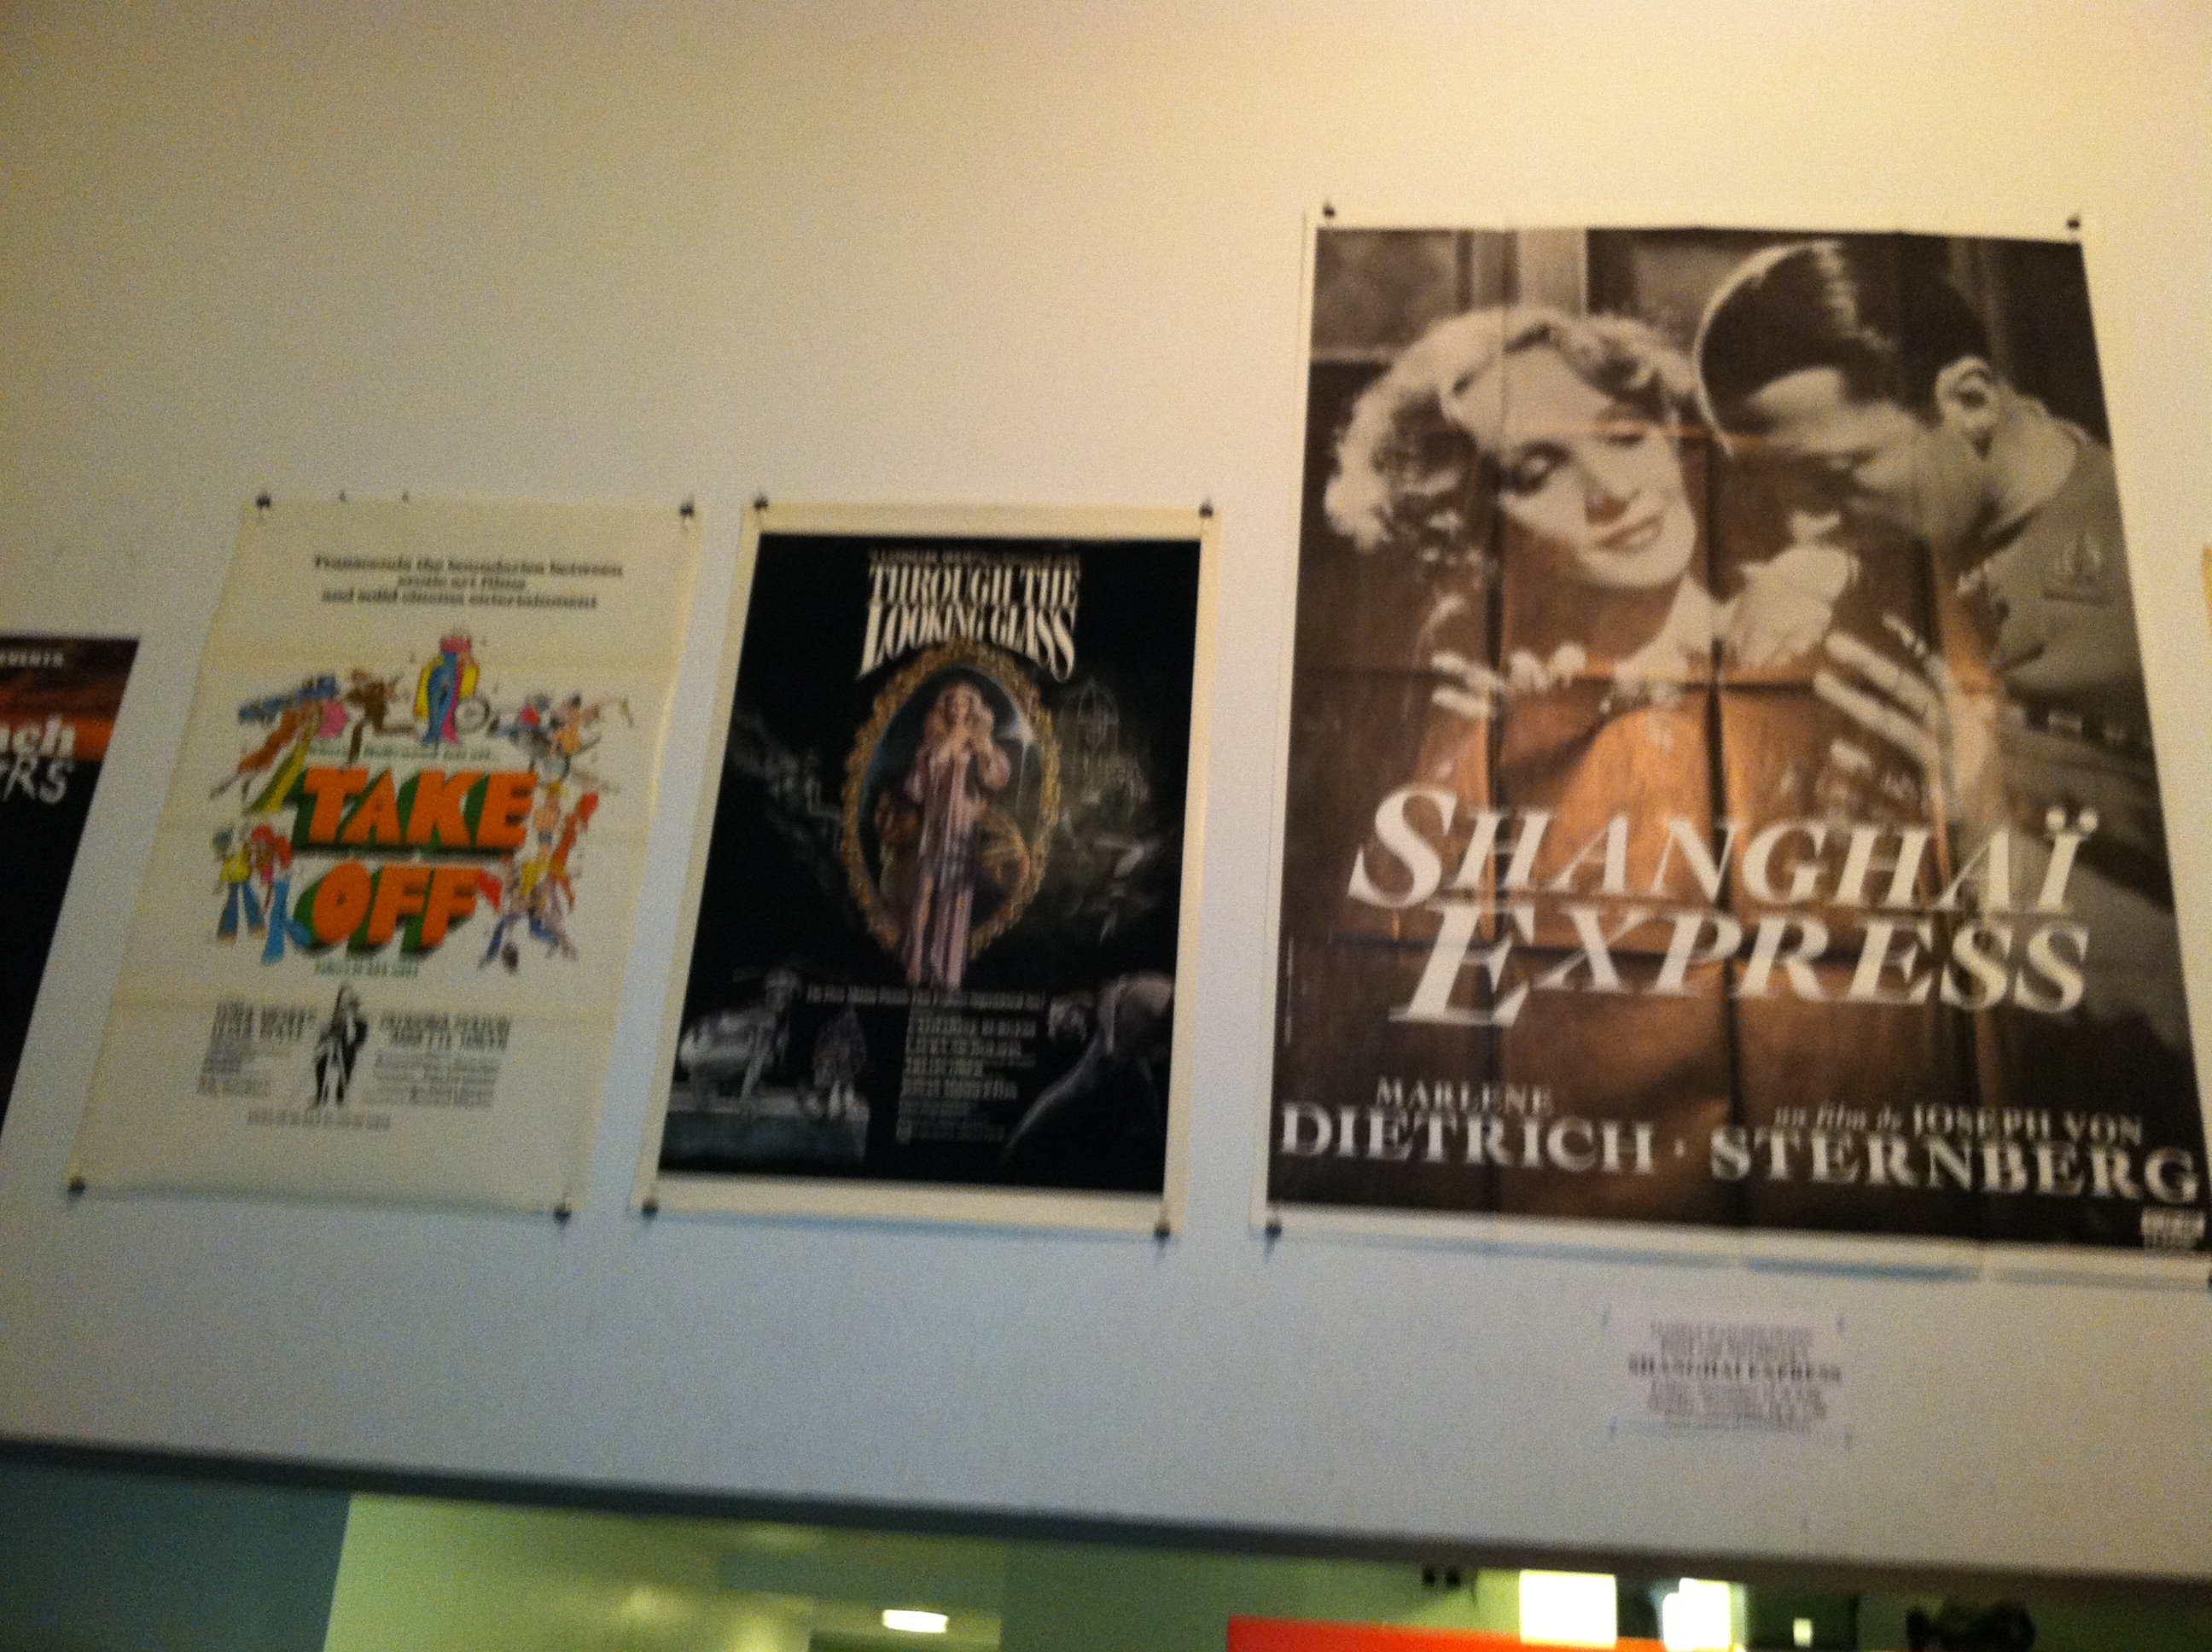 Lobby Posters at Anthology Film Archives.